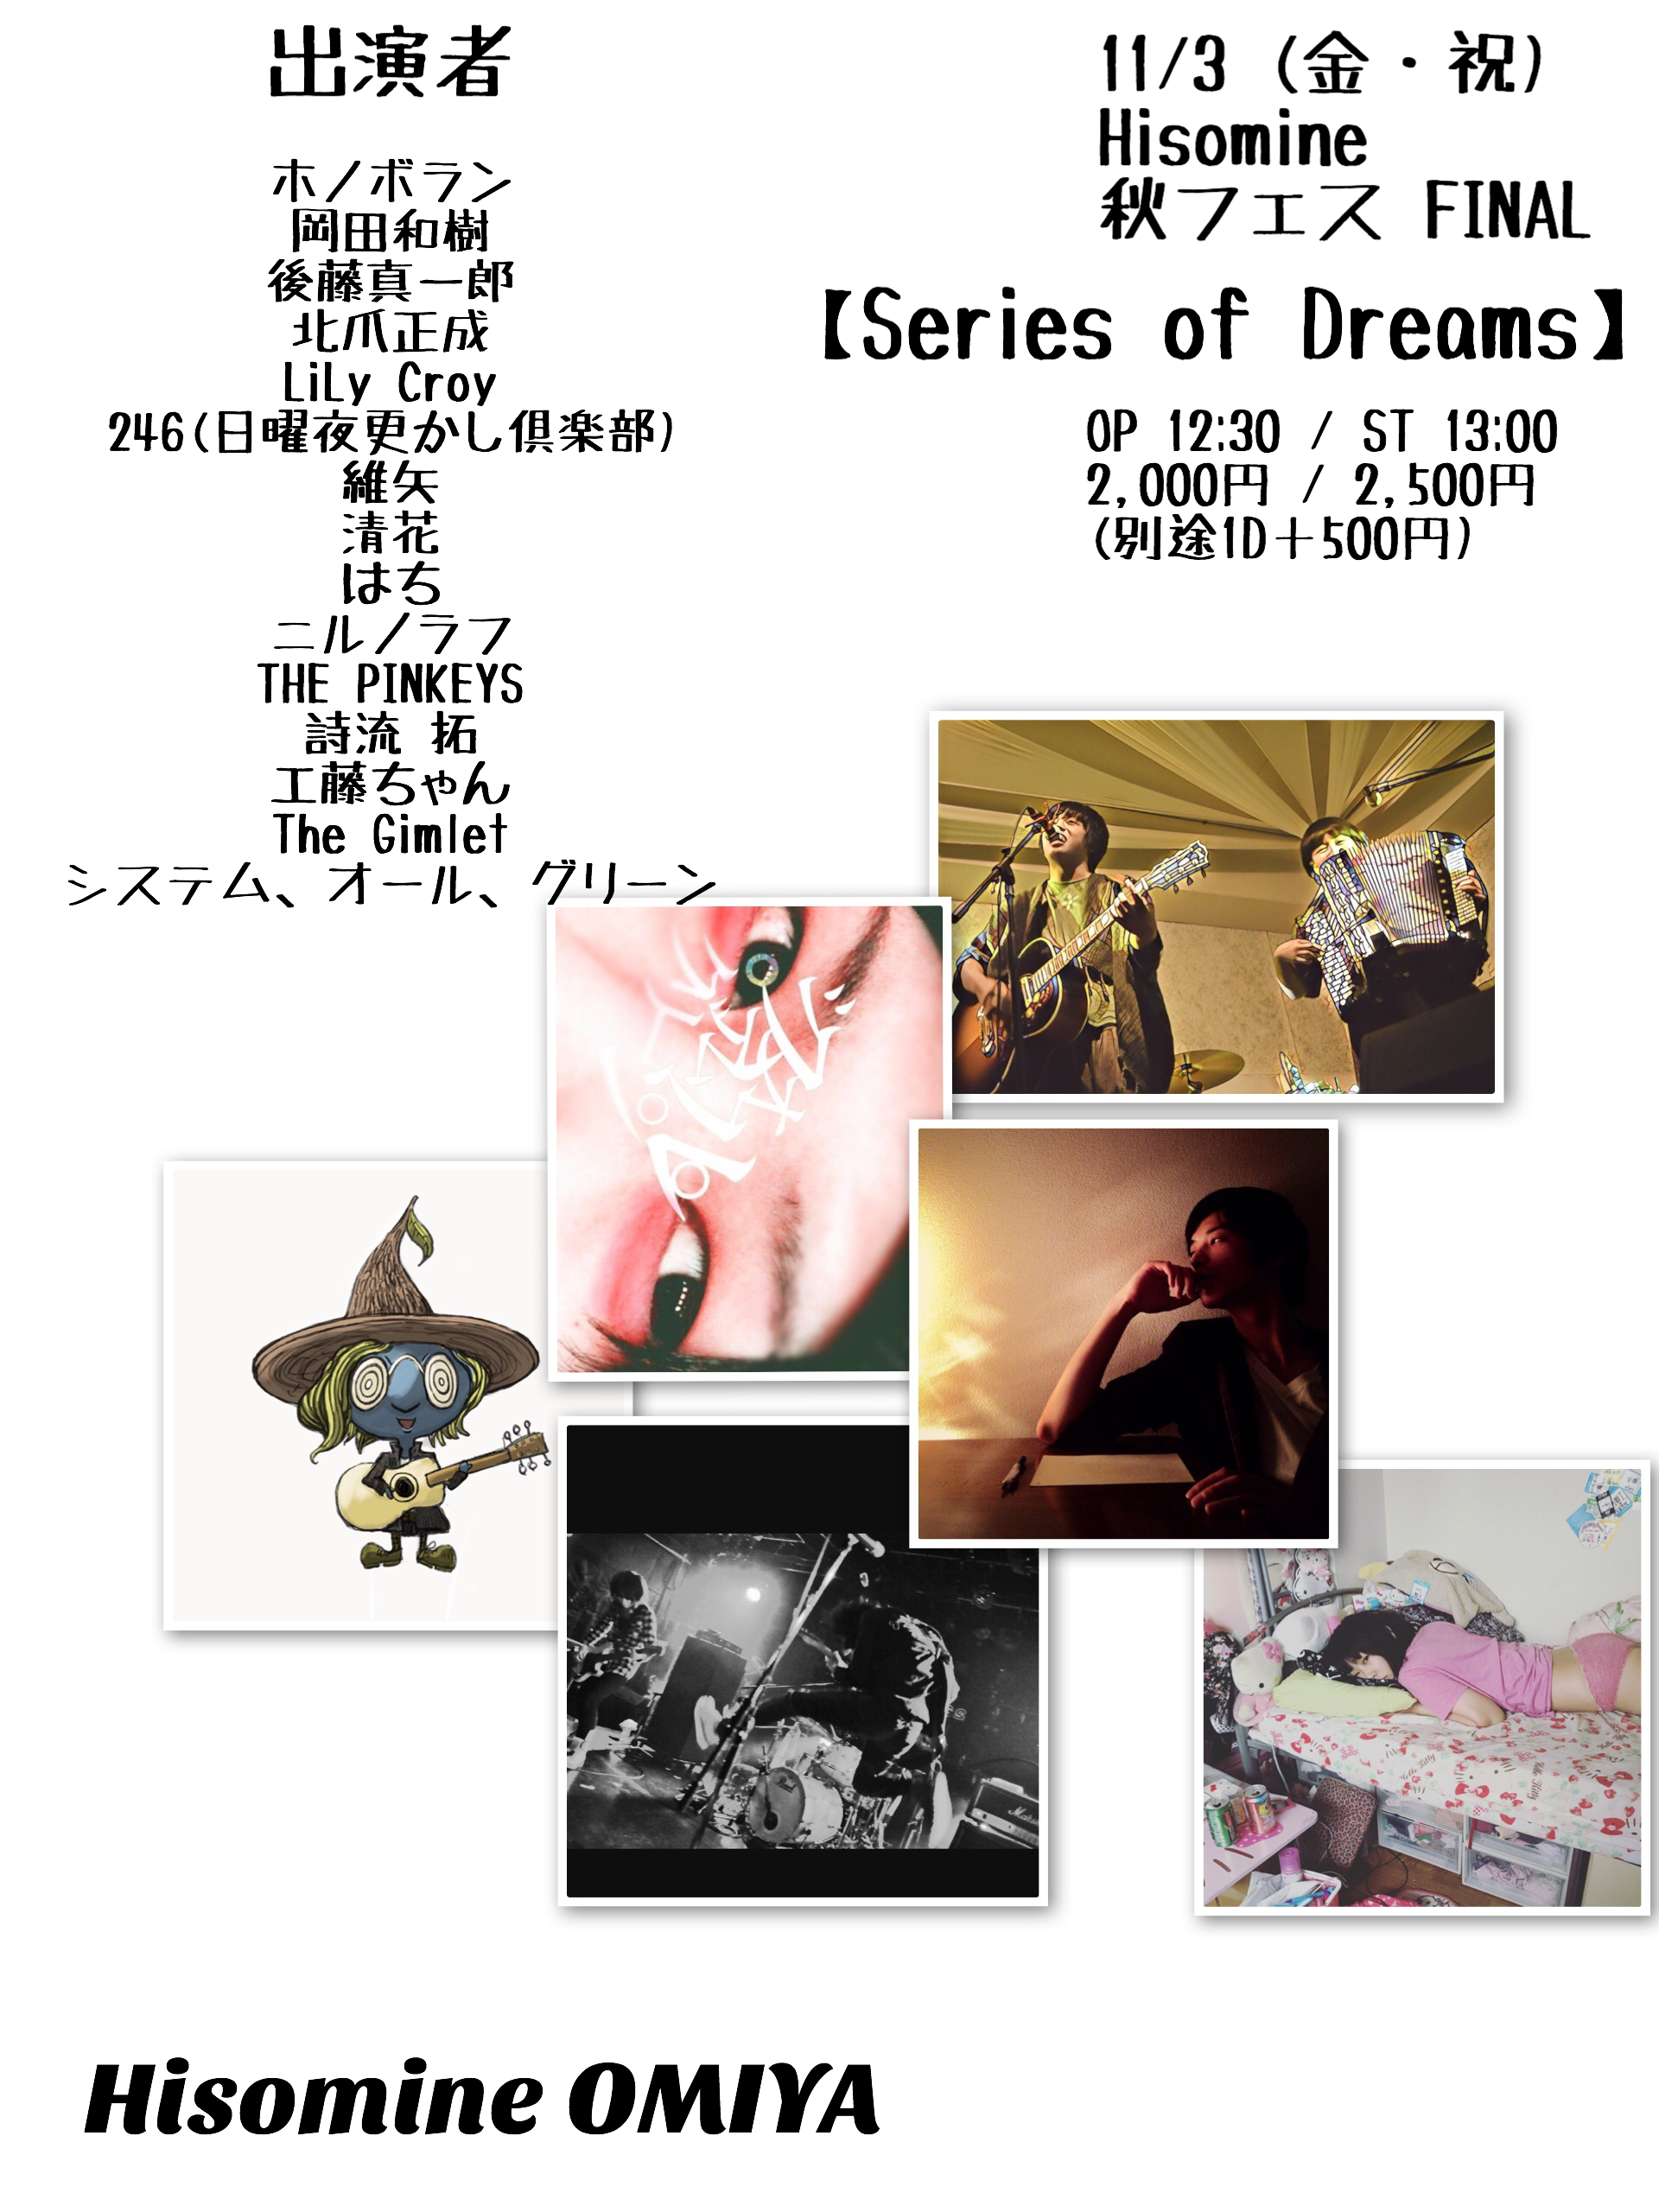 Hisomine 秋フェス Final ! 【Series of Dreams】